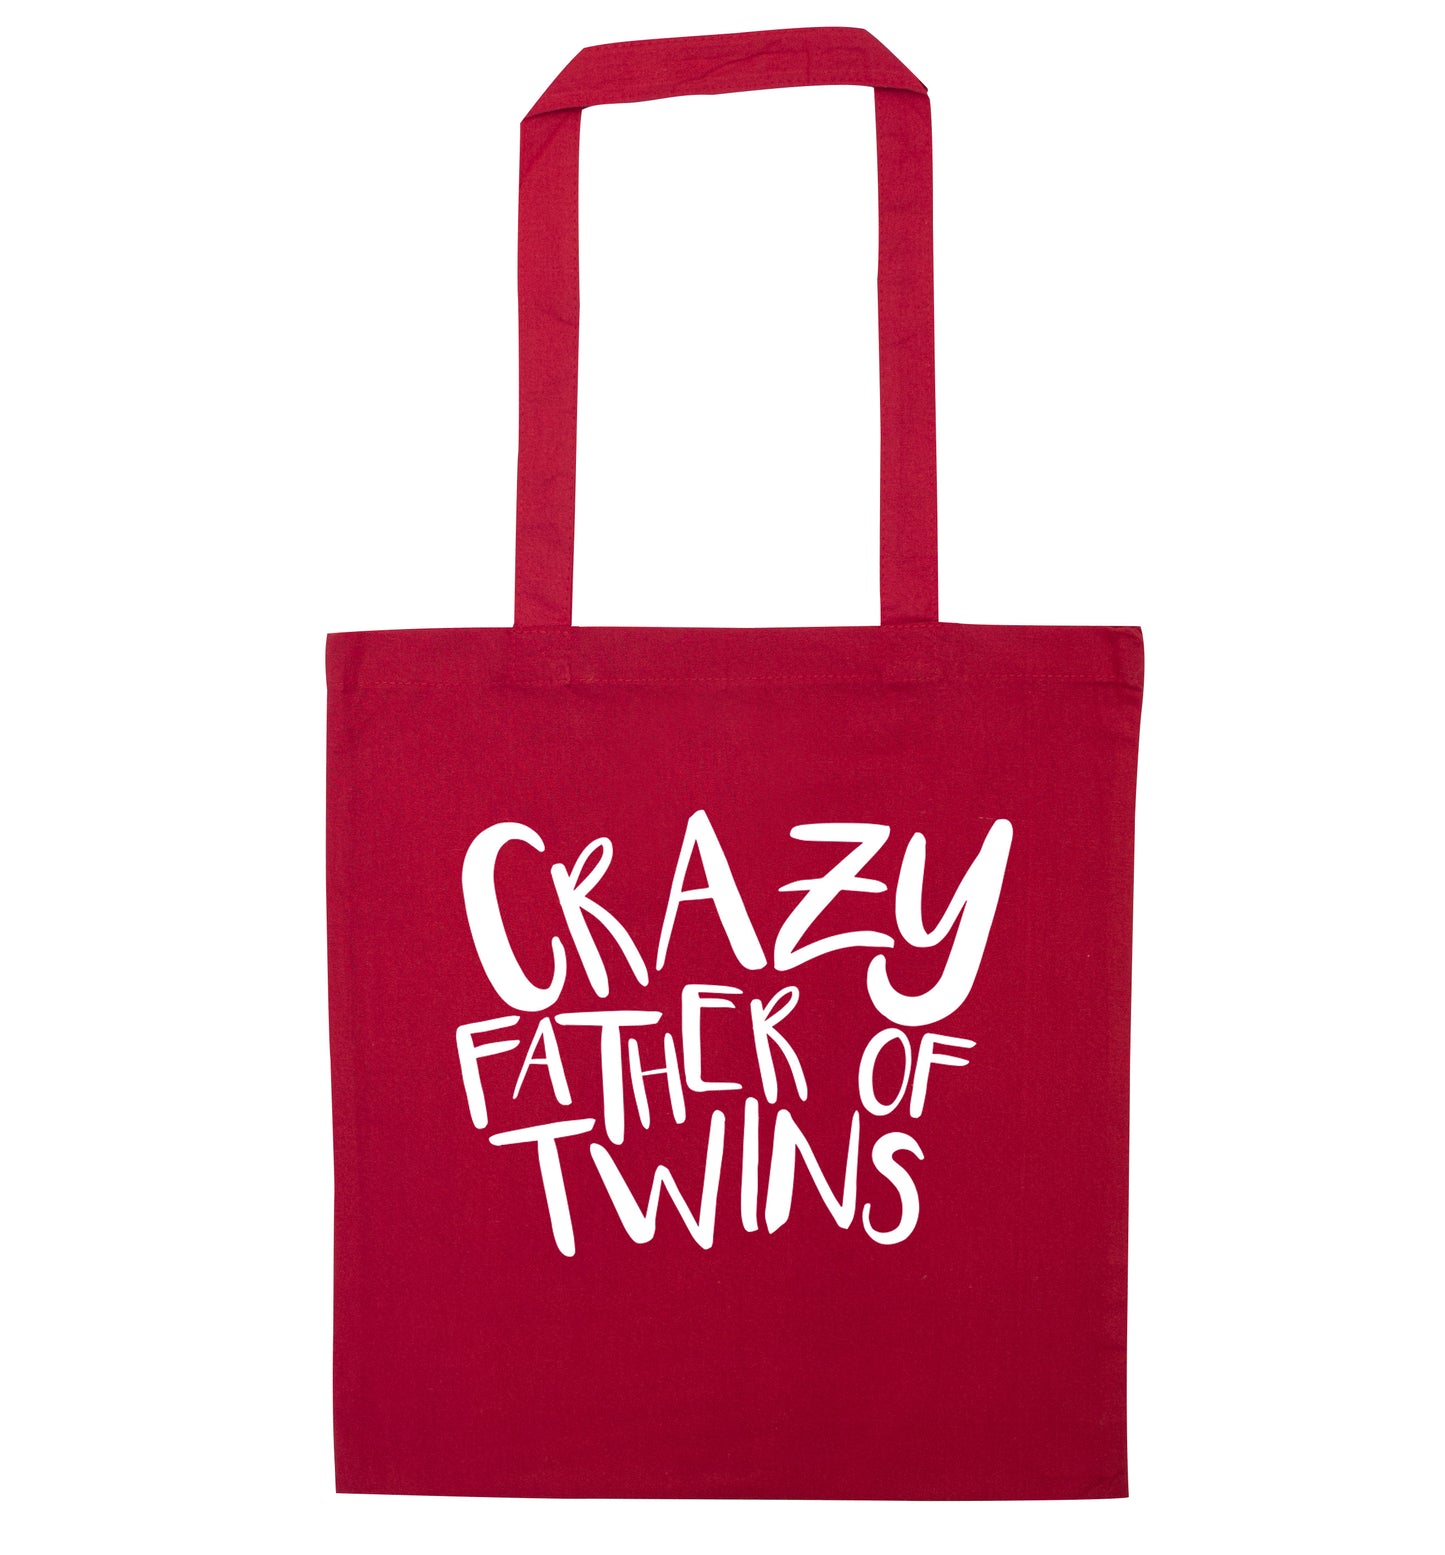 Crazy father of twins red tote bag